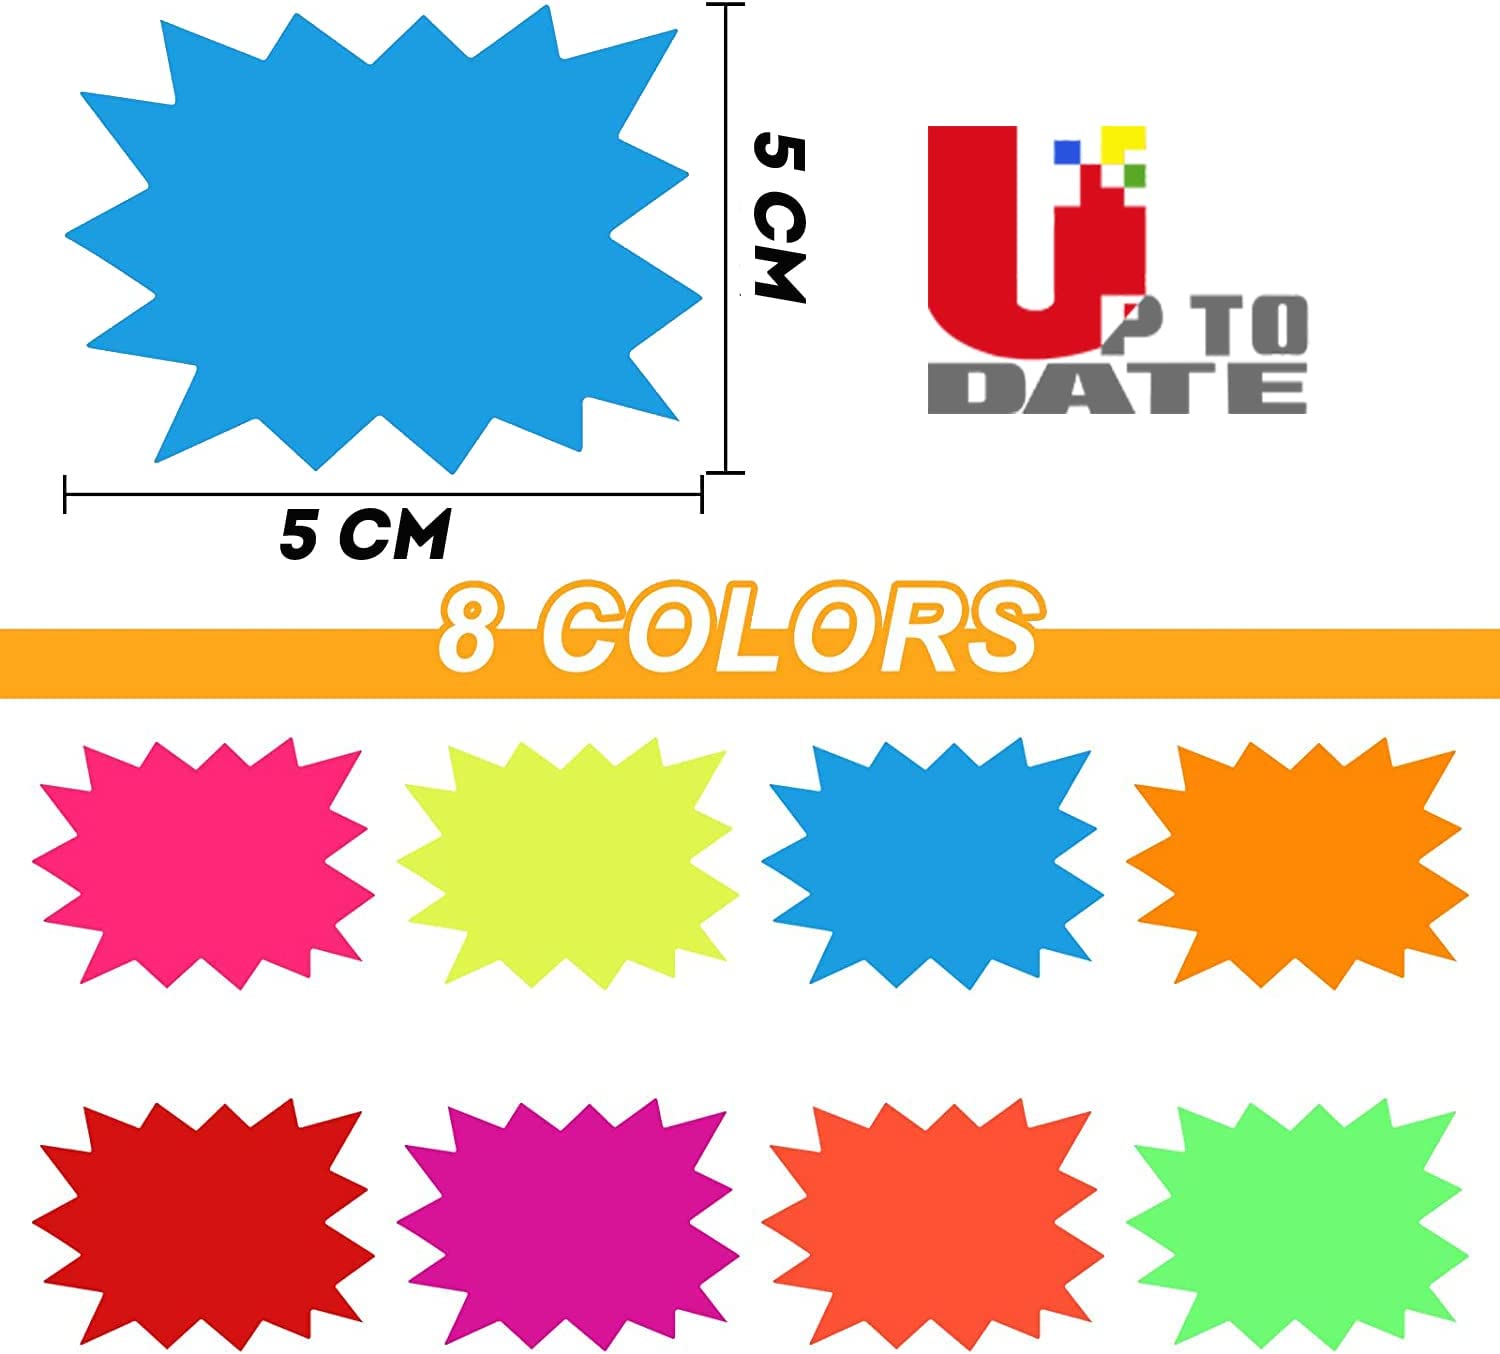 Merchandise pricing sticker for stores - Multicolor